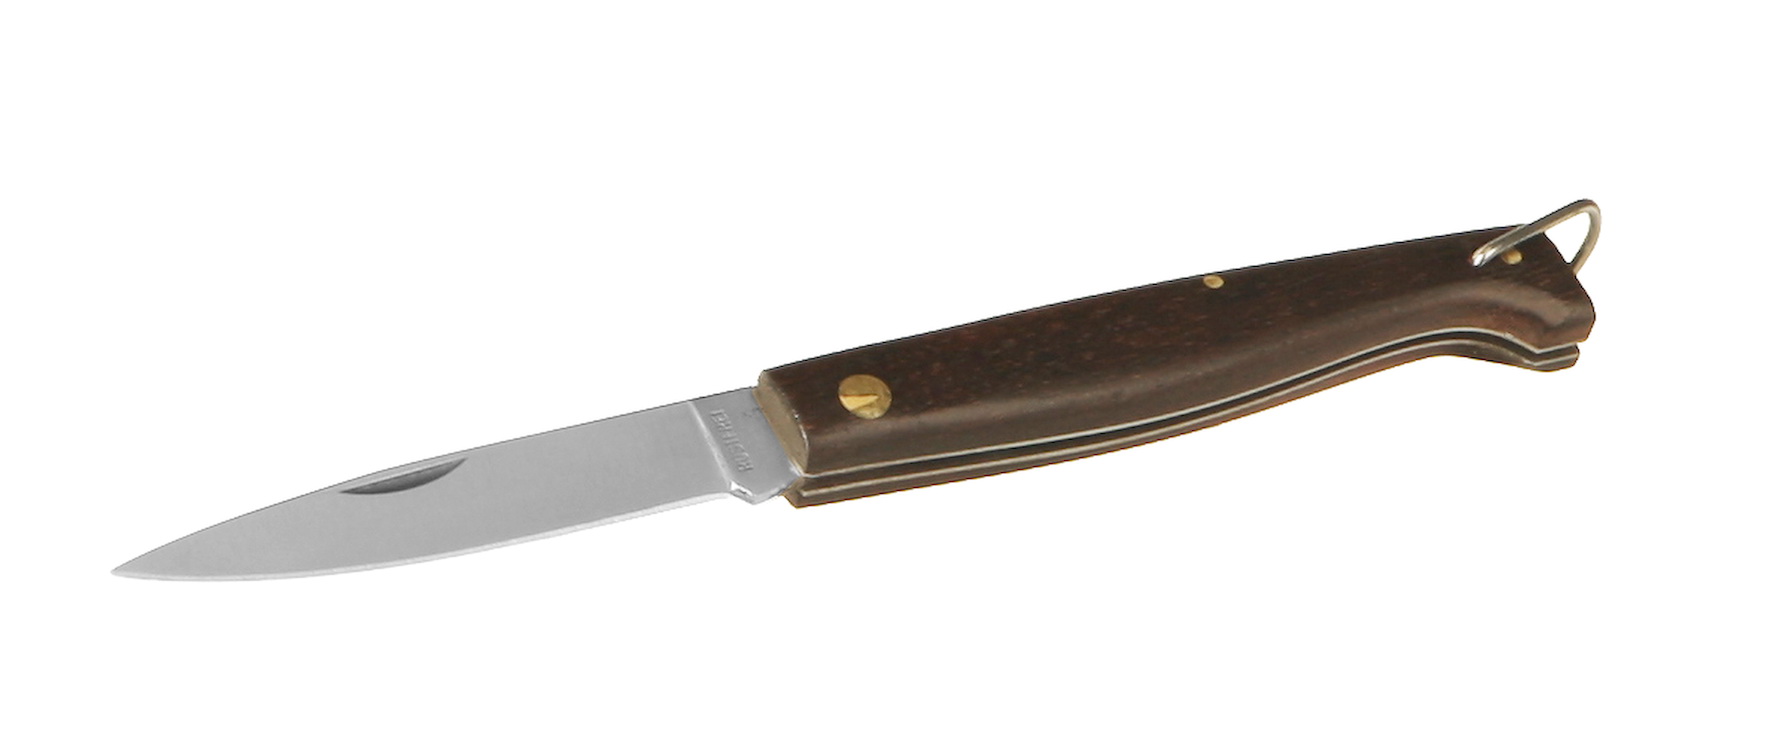 Jack-knife with wooden handle